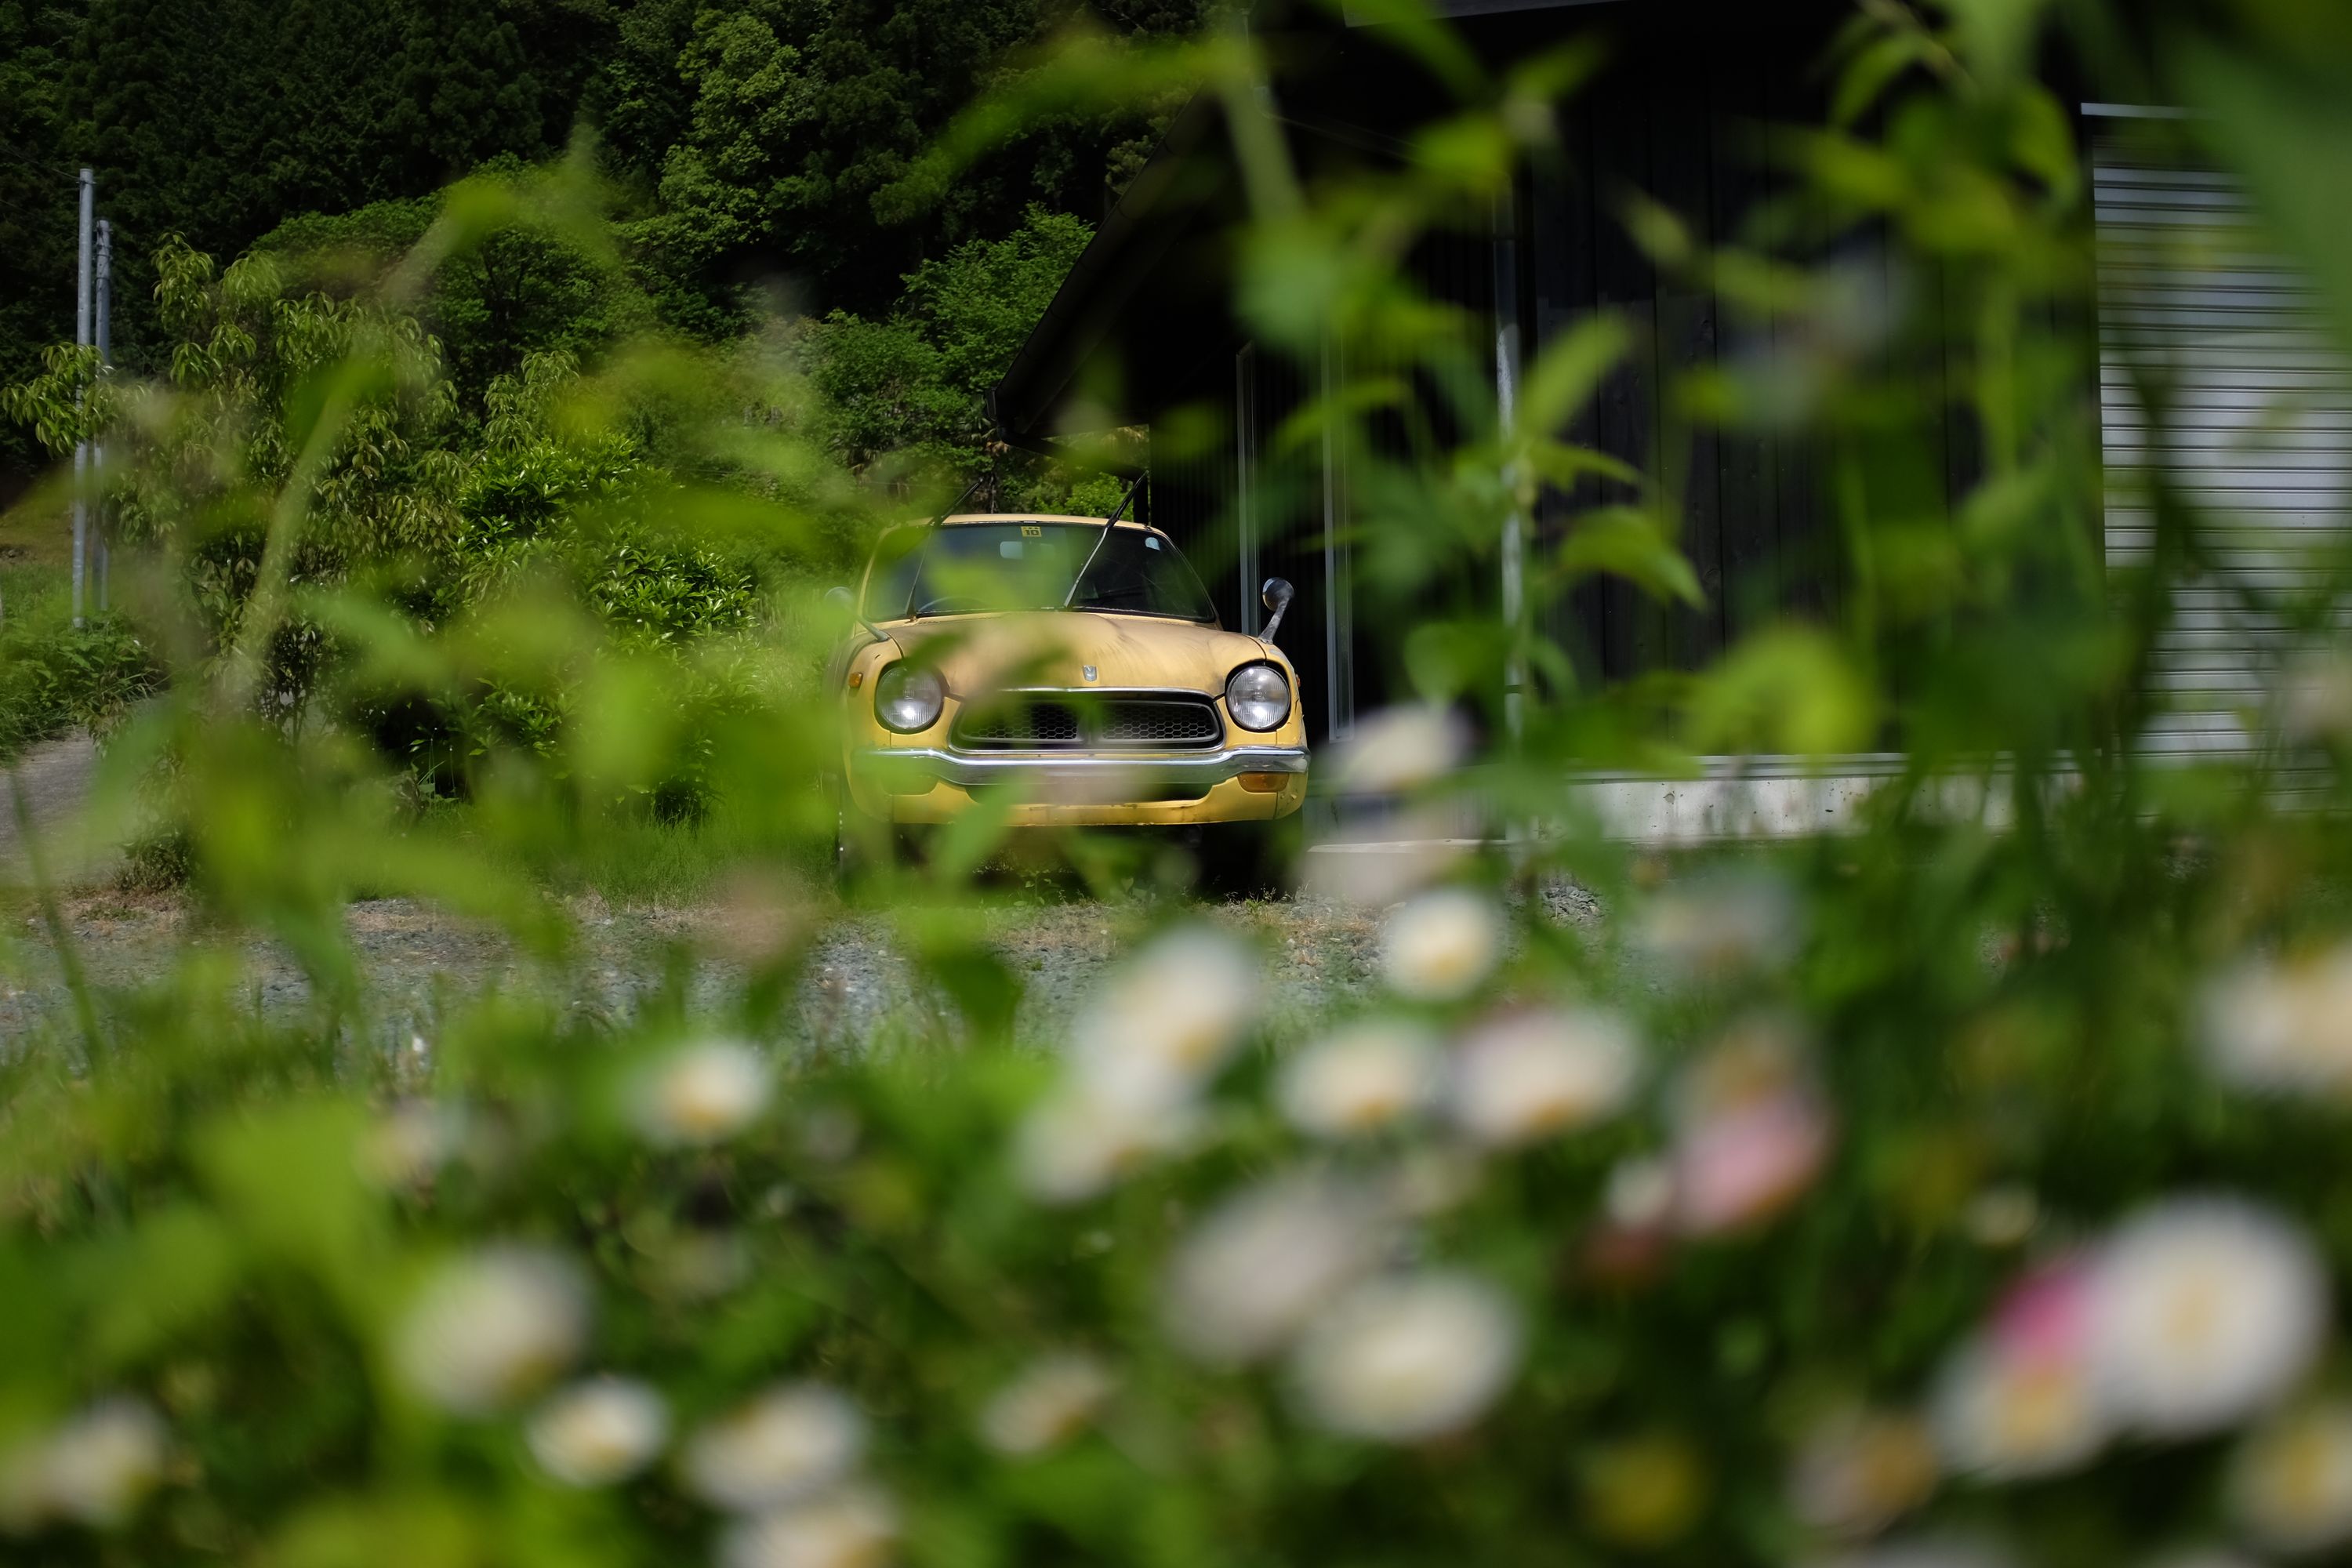 A tiny yellow Honda N600 hatchback from the 1960s in the background, photographed through a cluster of weeds.